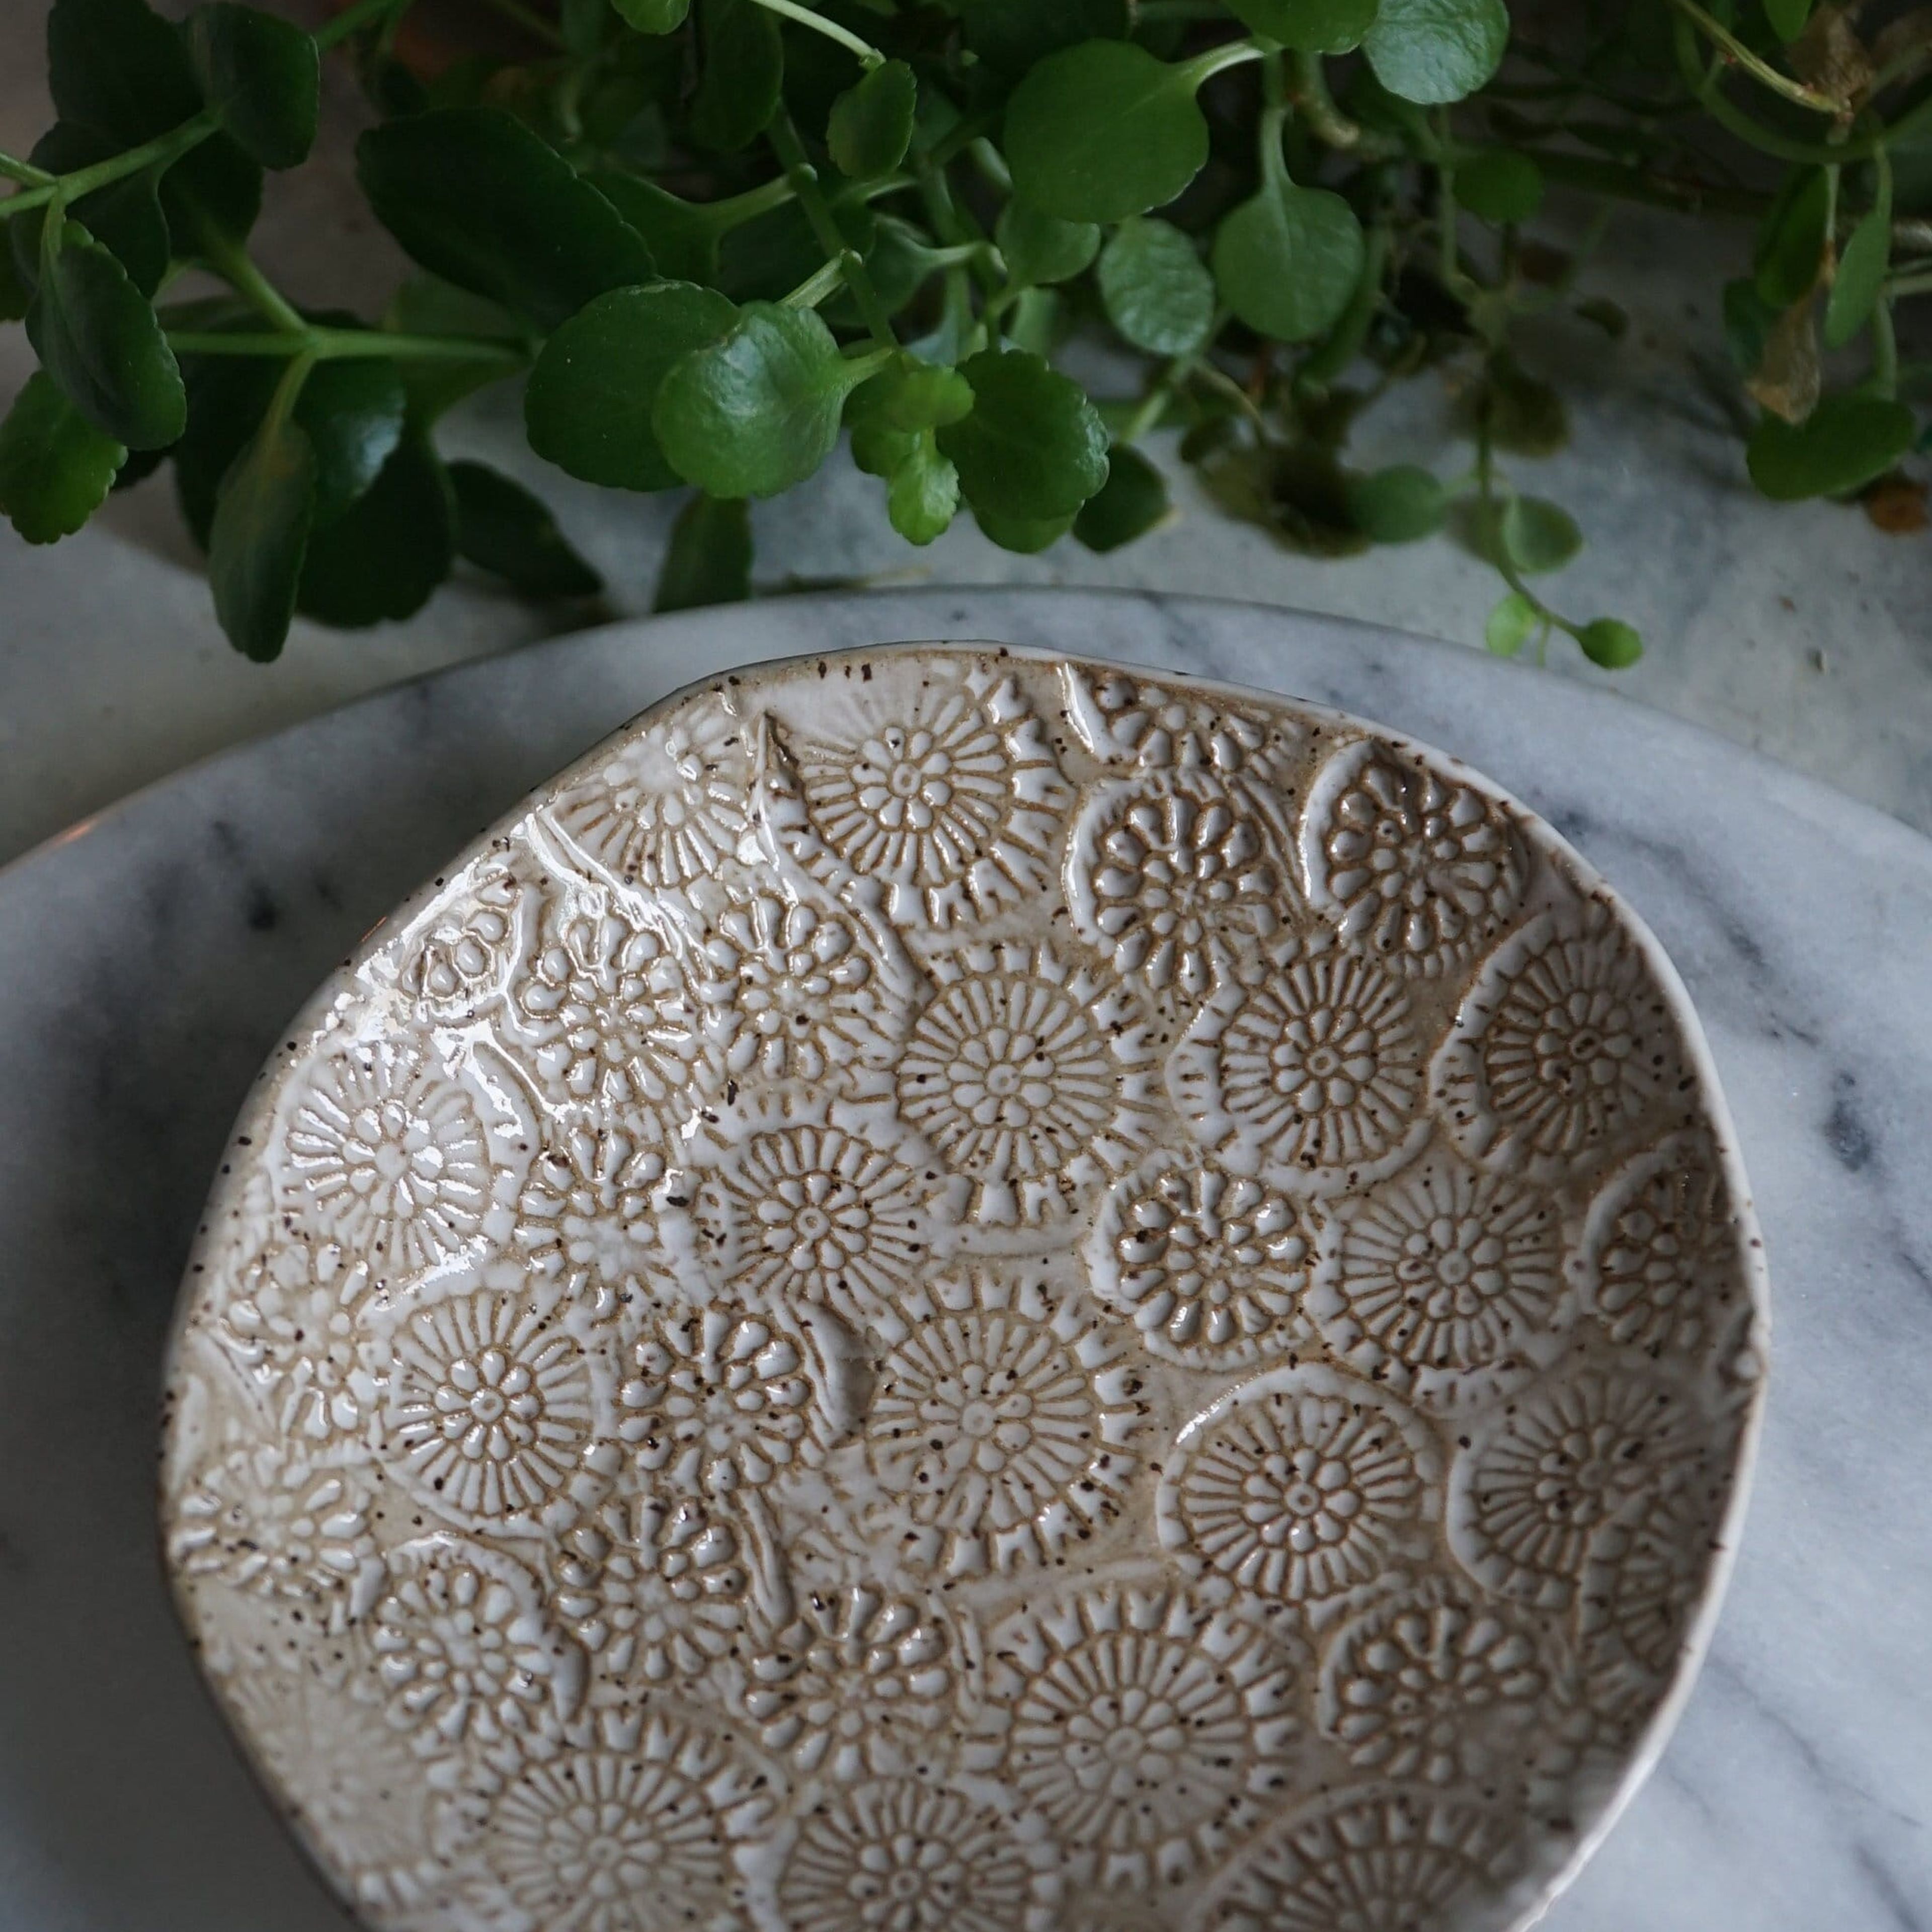 Speckled Stoneware Flora Bowl - White Stamped Dish - Small Serving Bowl - Catch-All Dish - Jewelry Dish - Wabi Sabi - Rustic Plate